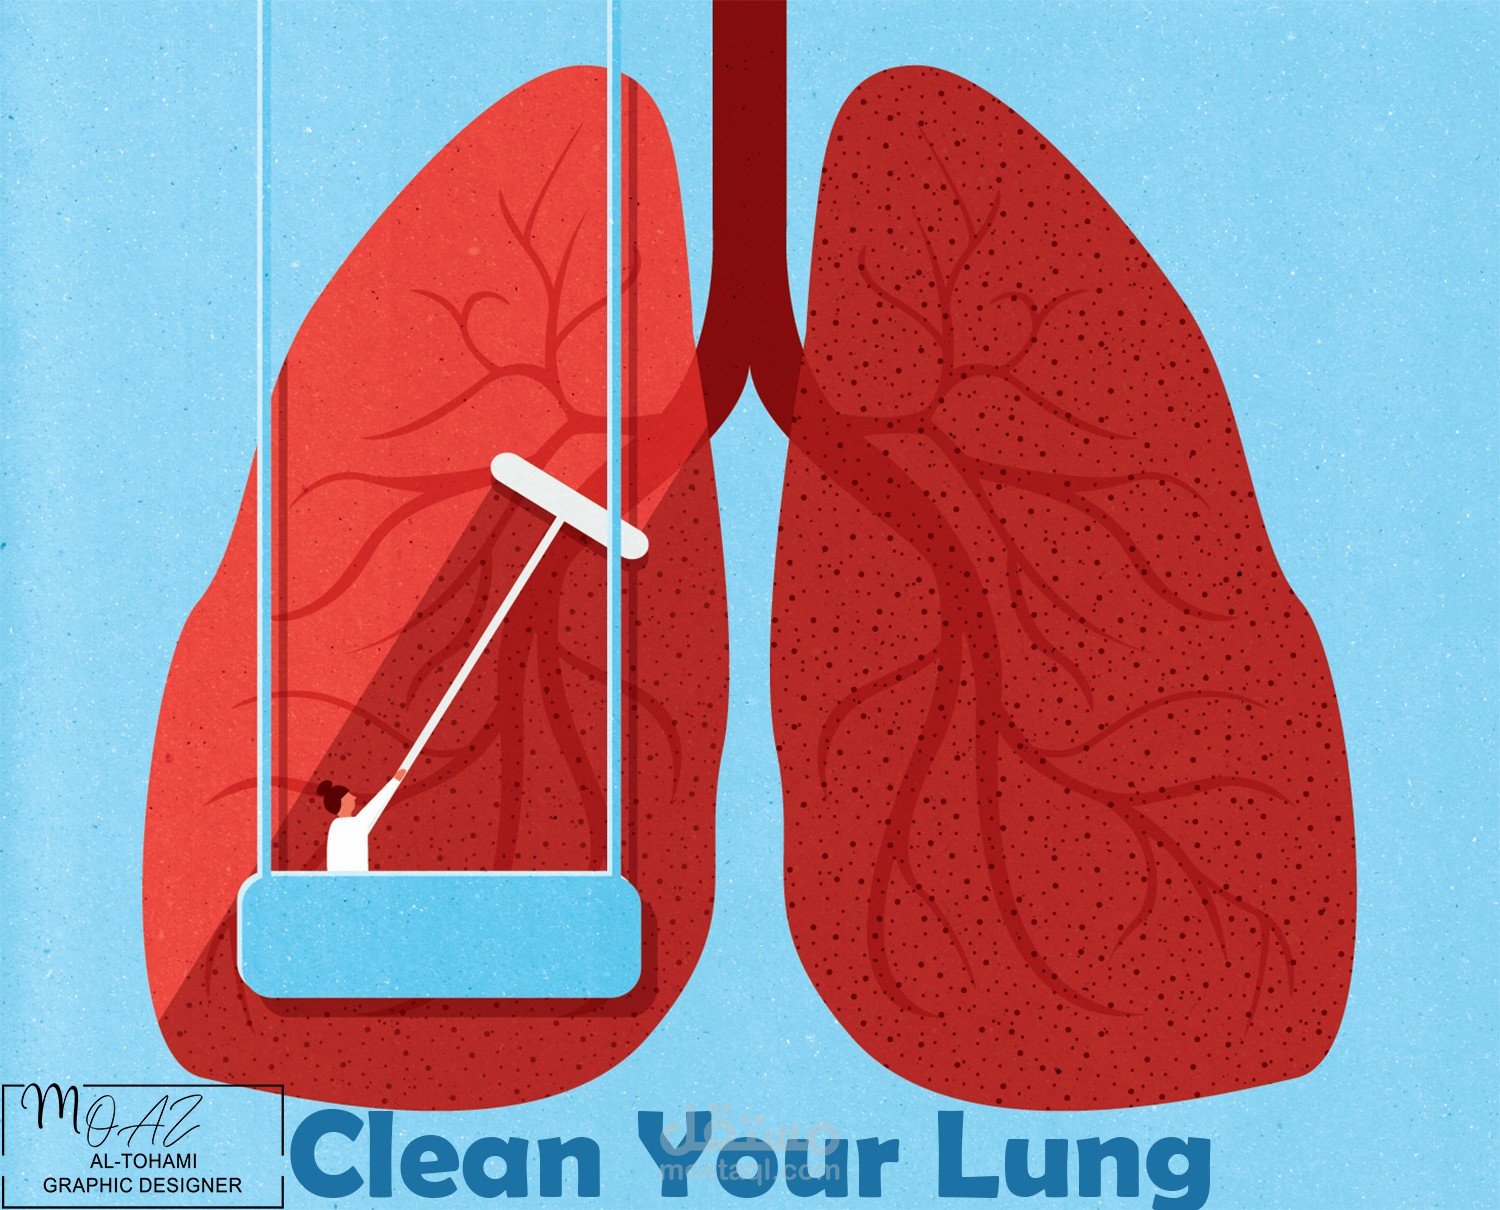 Clean Your Lung  مستقل